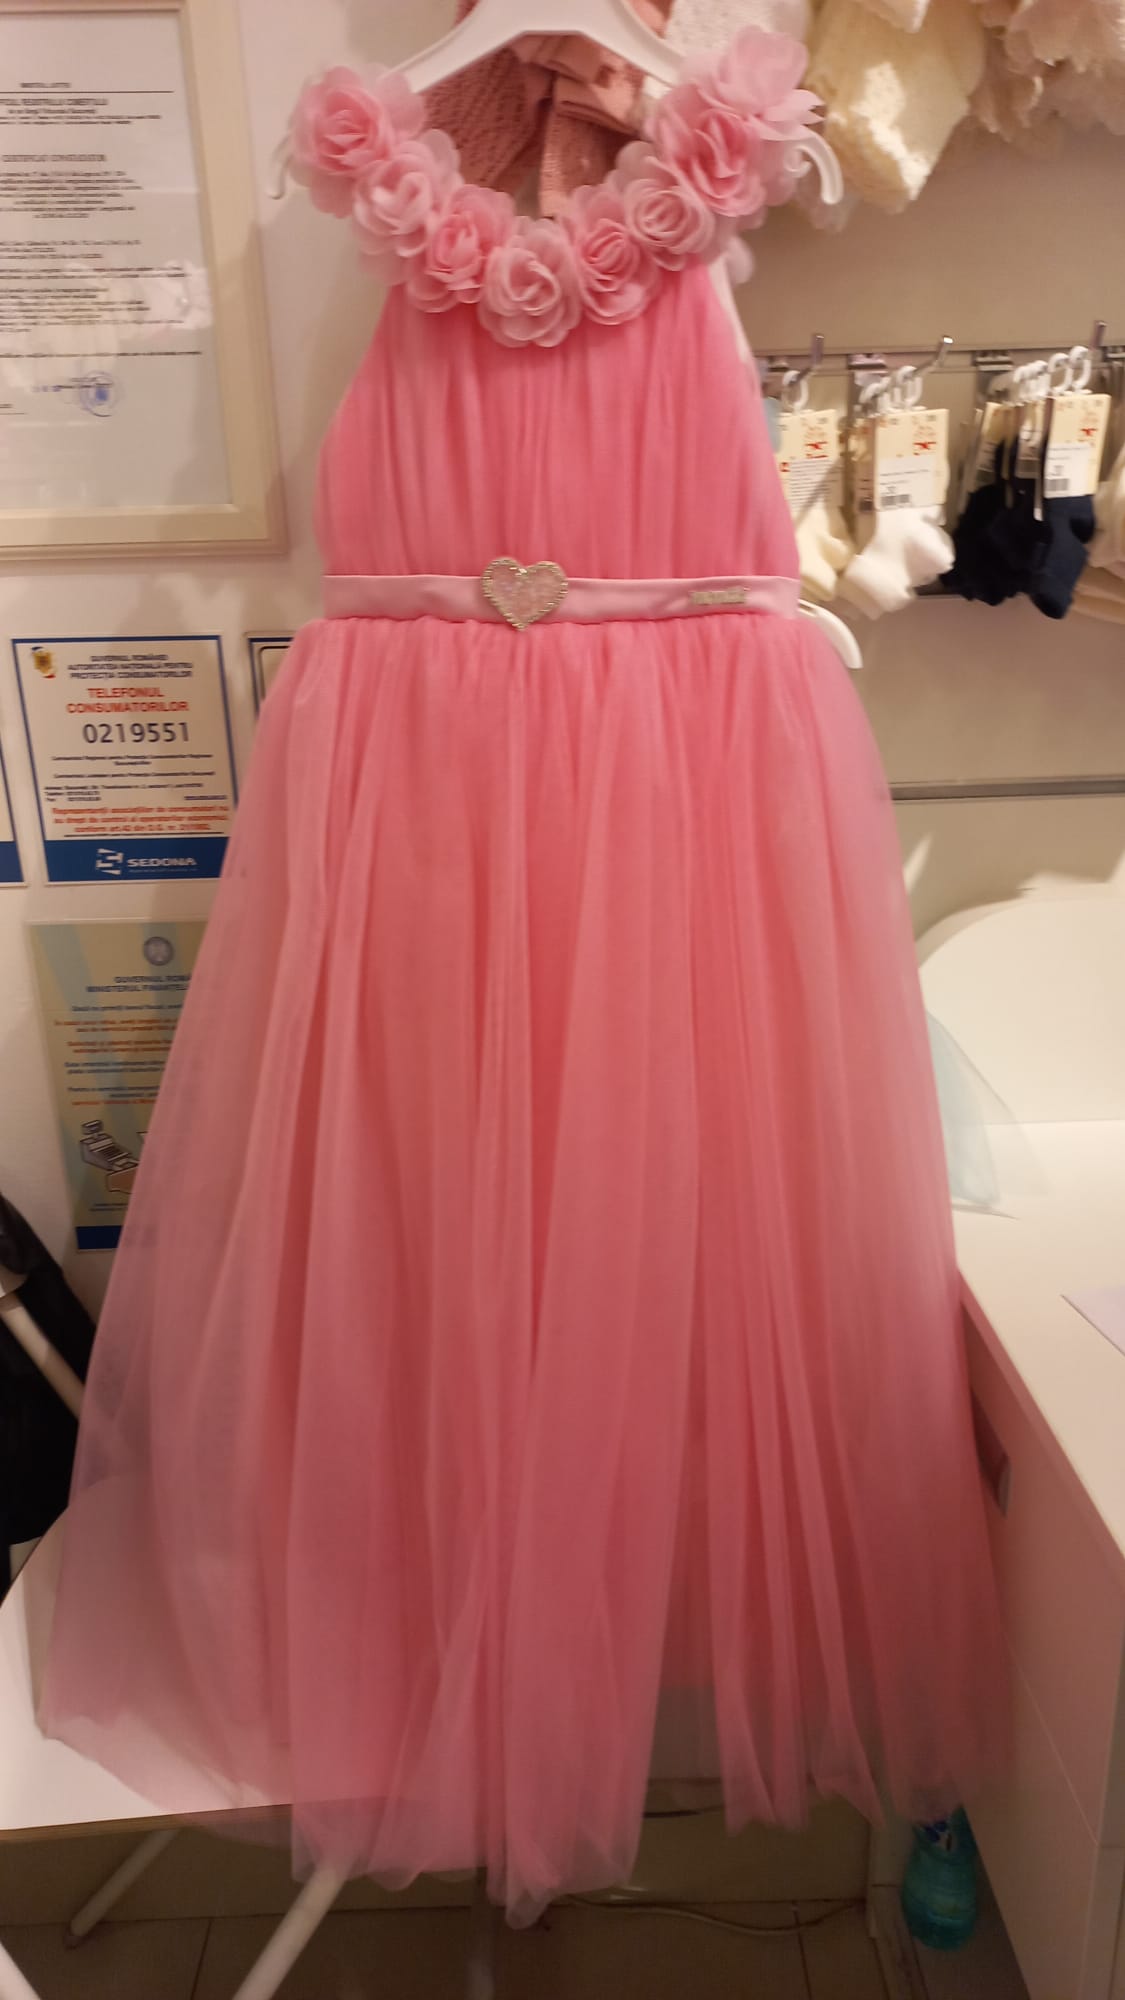 Ceremony Dress, Long Pink Tulle with Appliqued Flowers and Heart at Waist 2934 Mon Princess